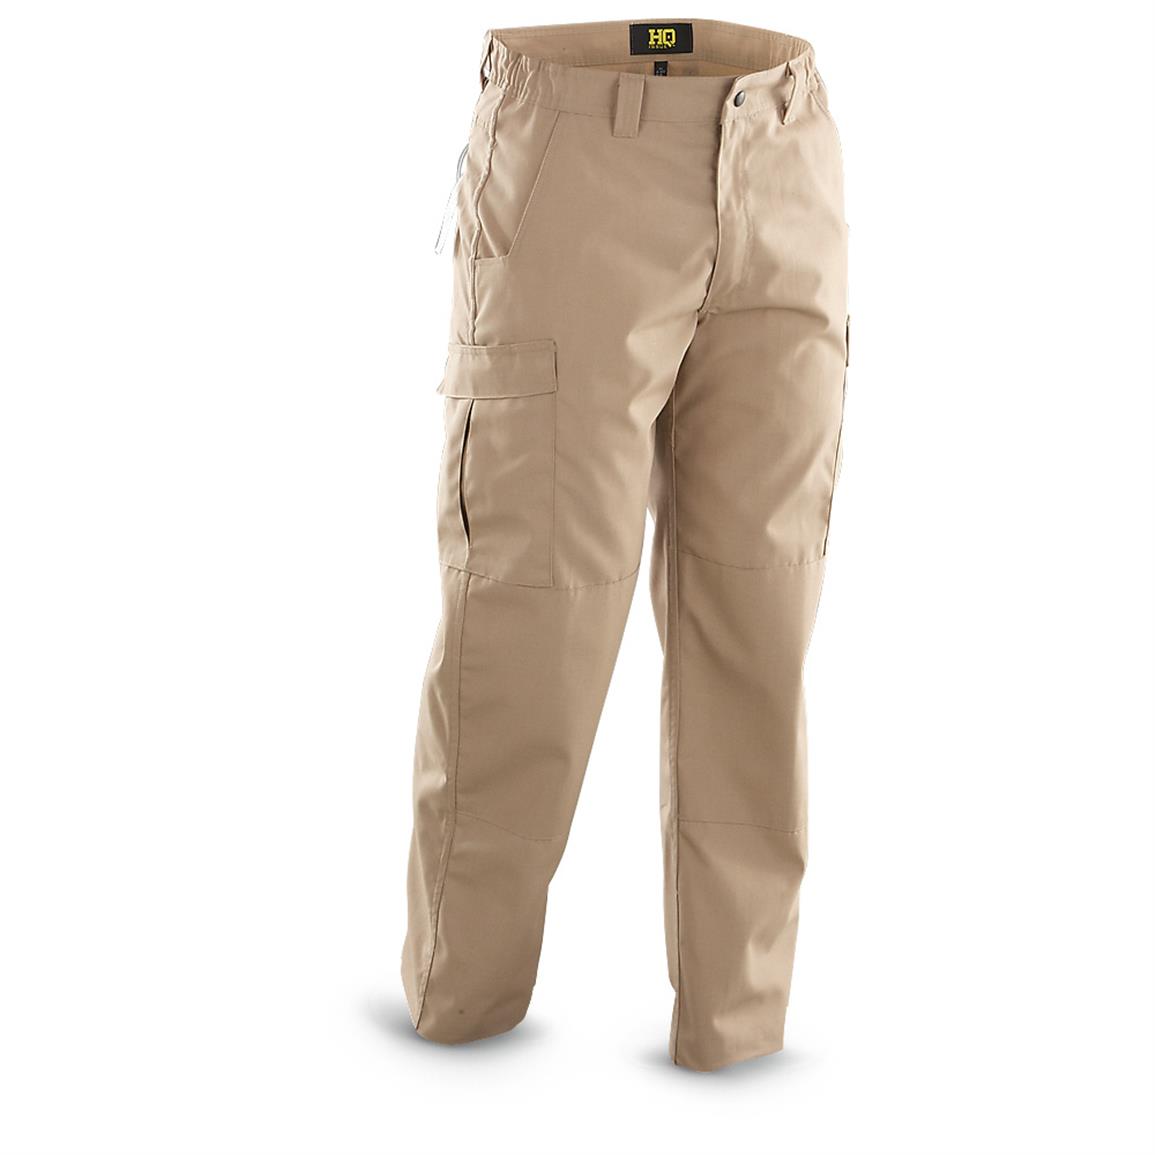 HQ ISSUE Men's Ripstop Tactical Cargo Pants - 592332, Tactical Clothing ...